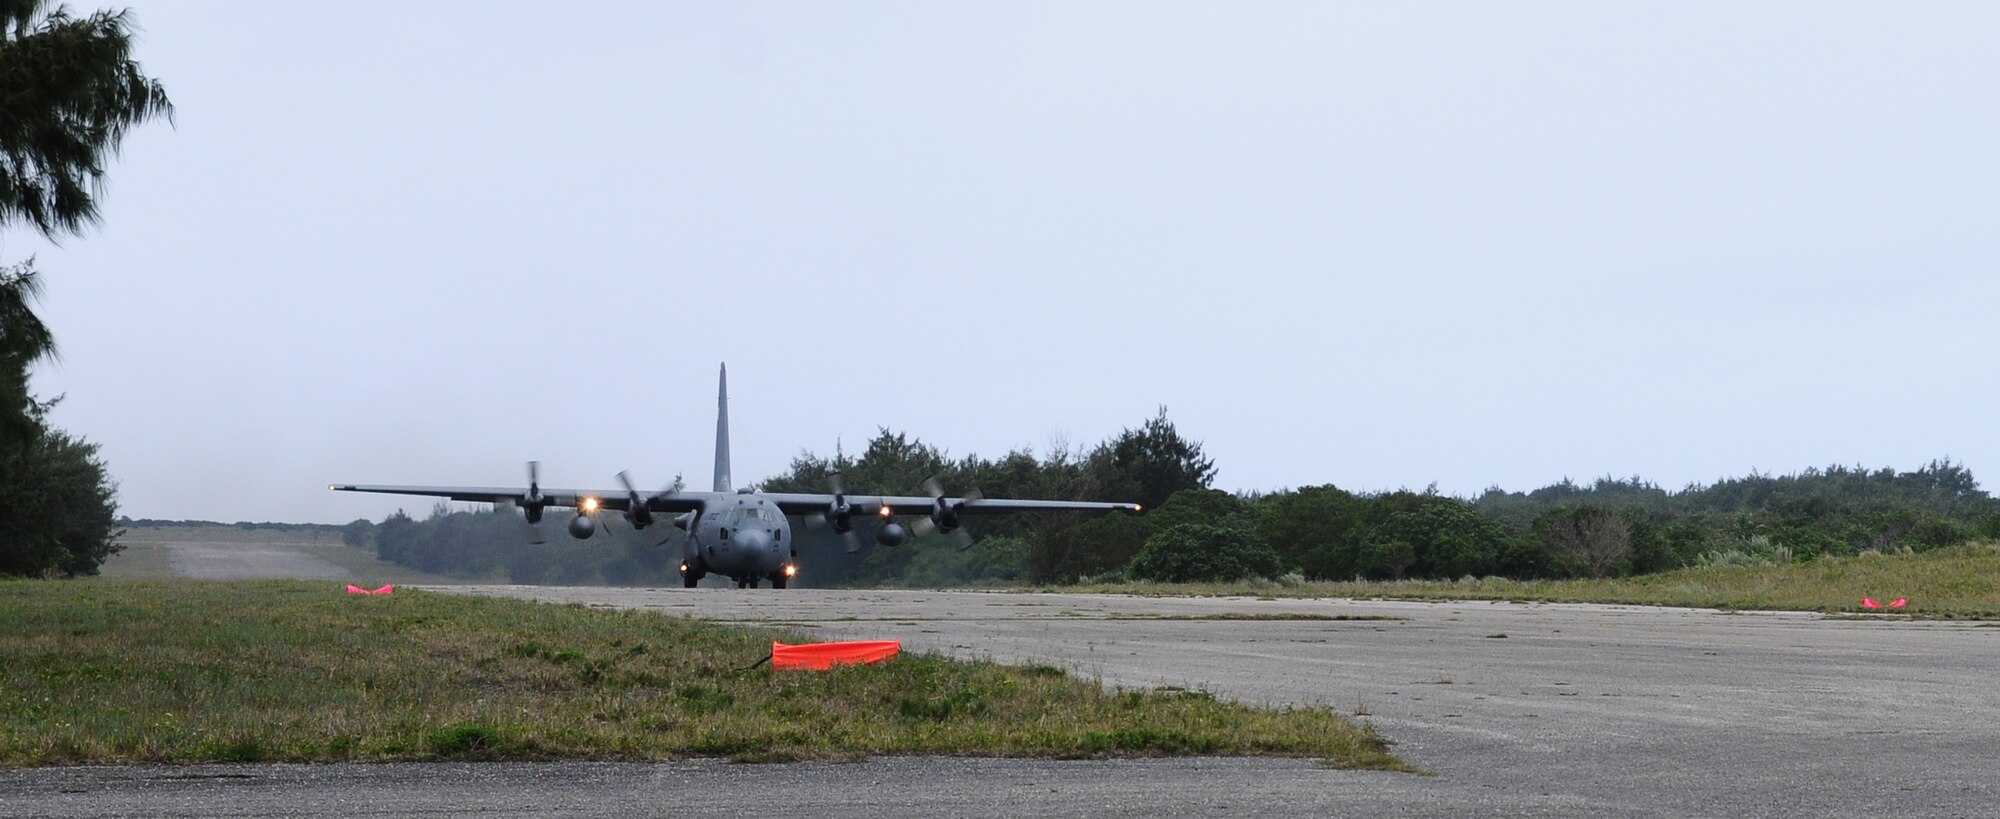 ANDERSEN AIR FORCE BASE, Guam- A C-130 from the 374th Airlift Wing, lands at Andersen North West Field in support of the Humanitarian Assistance Disaster Relief exercise, 13 Feb. The exercise will last for five days  and will have  the Royal Australian Air Force and the Japan Air Self Defense Force integration, allowing each force to see how the other works in this scenario.(U.S. Air Force photo/Senior Airman Carlin Leslie)